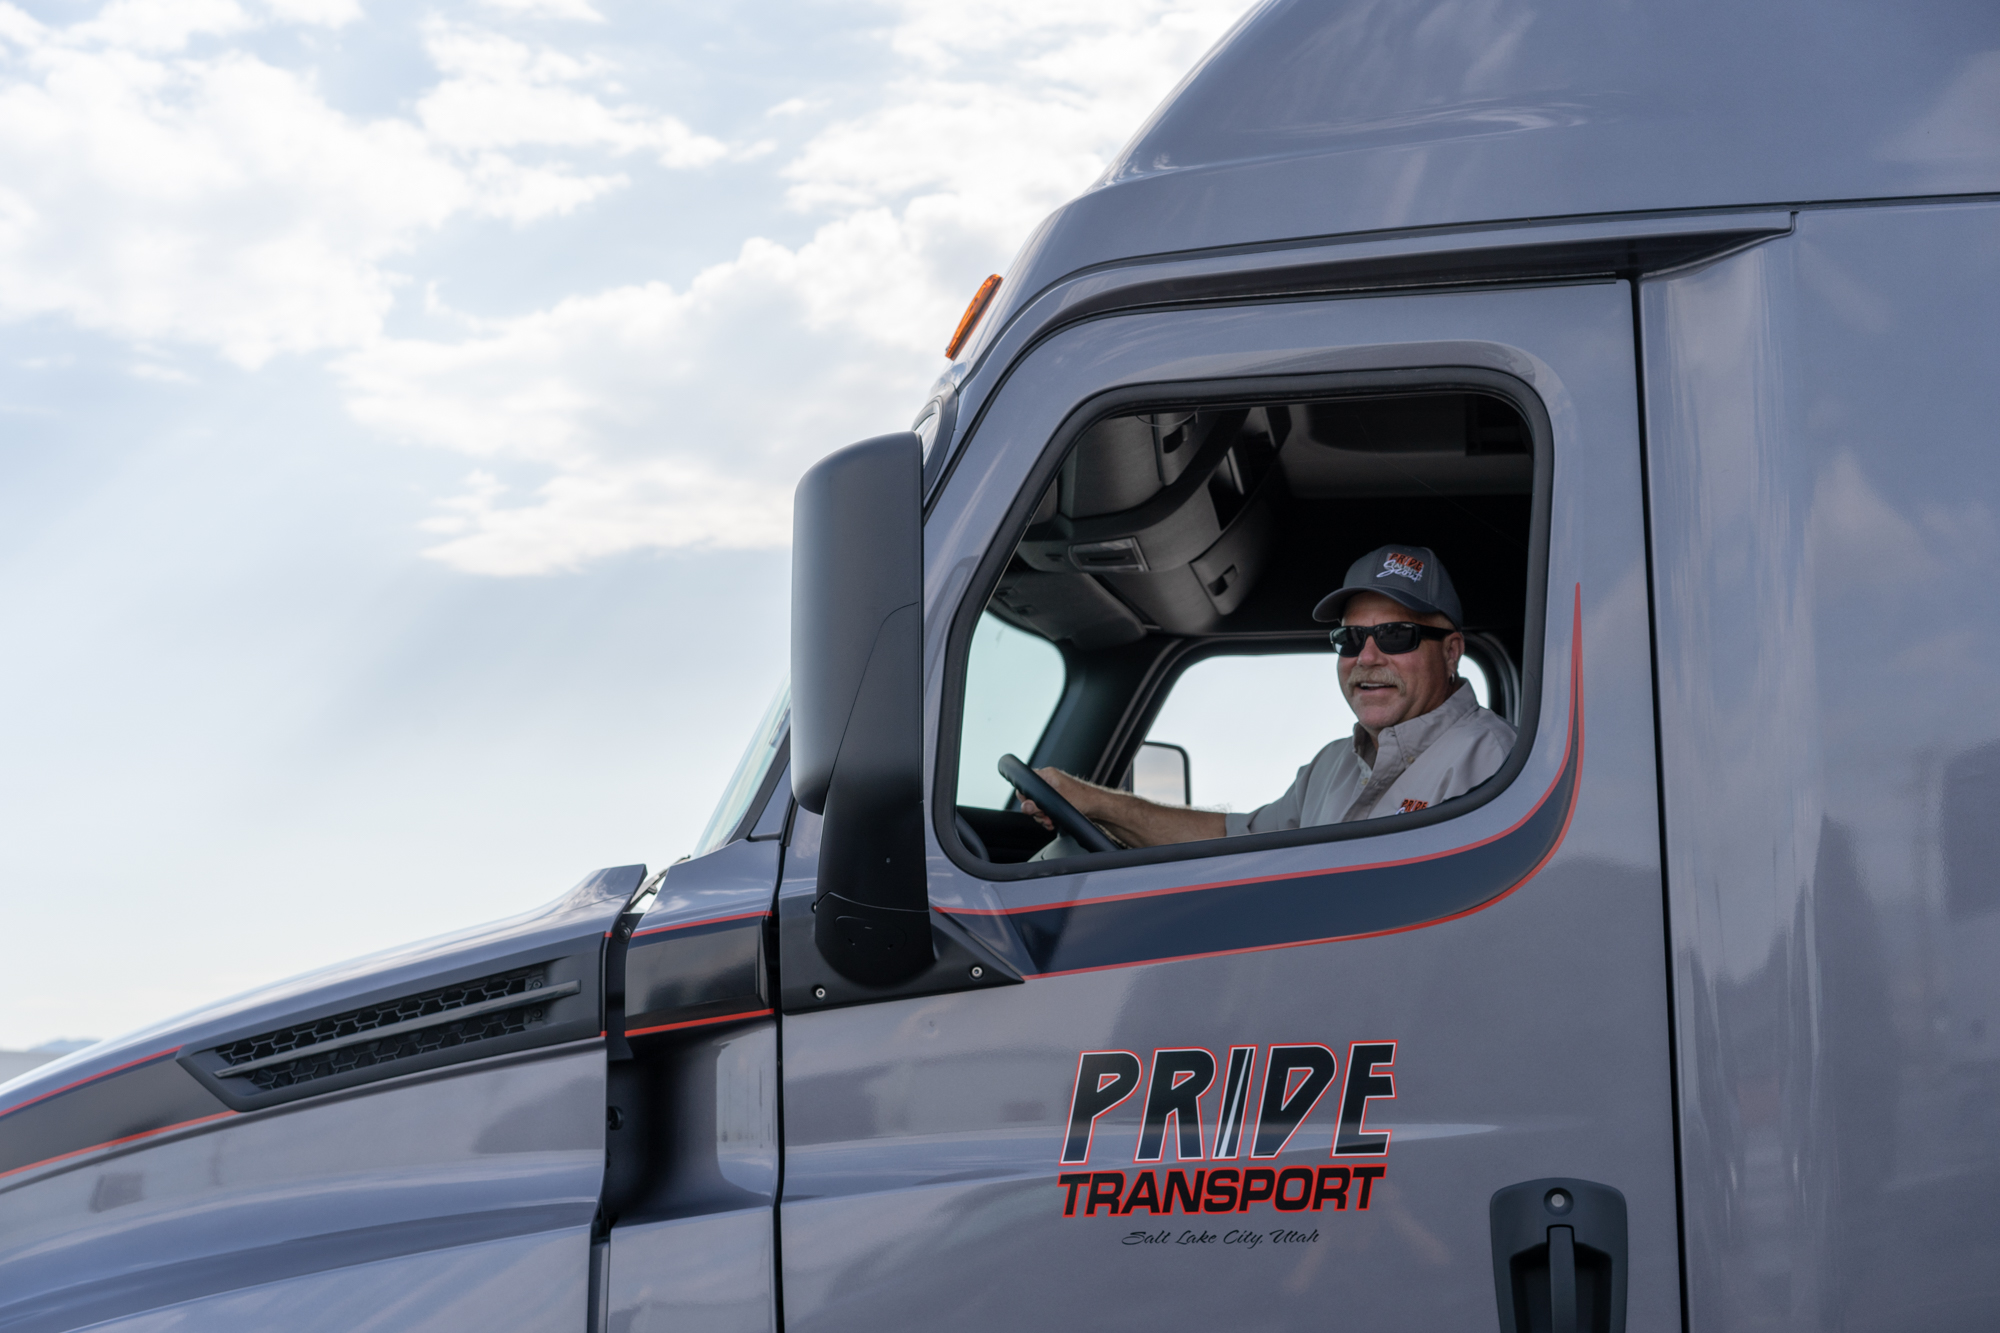 pride transport driver looking out the driver's side window smiling